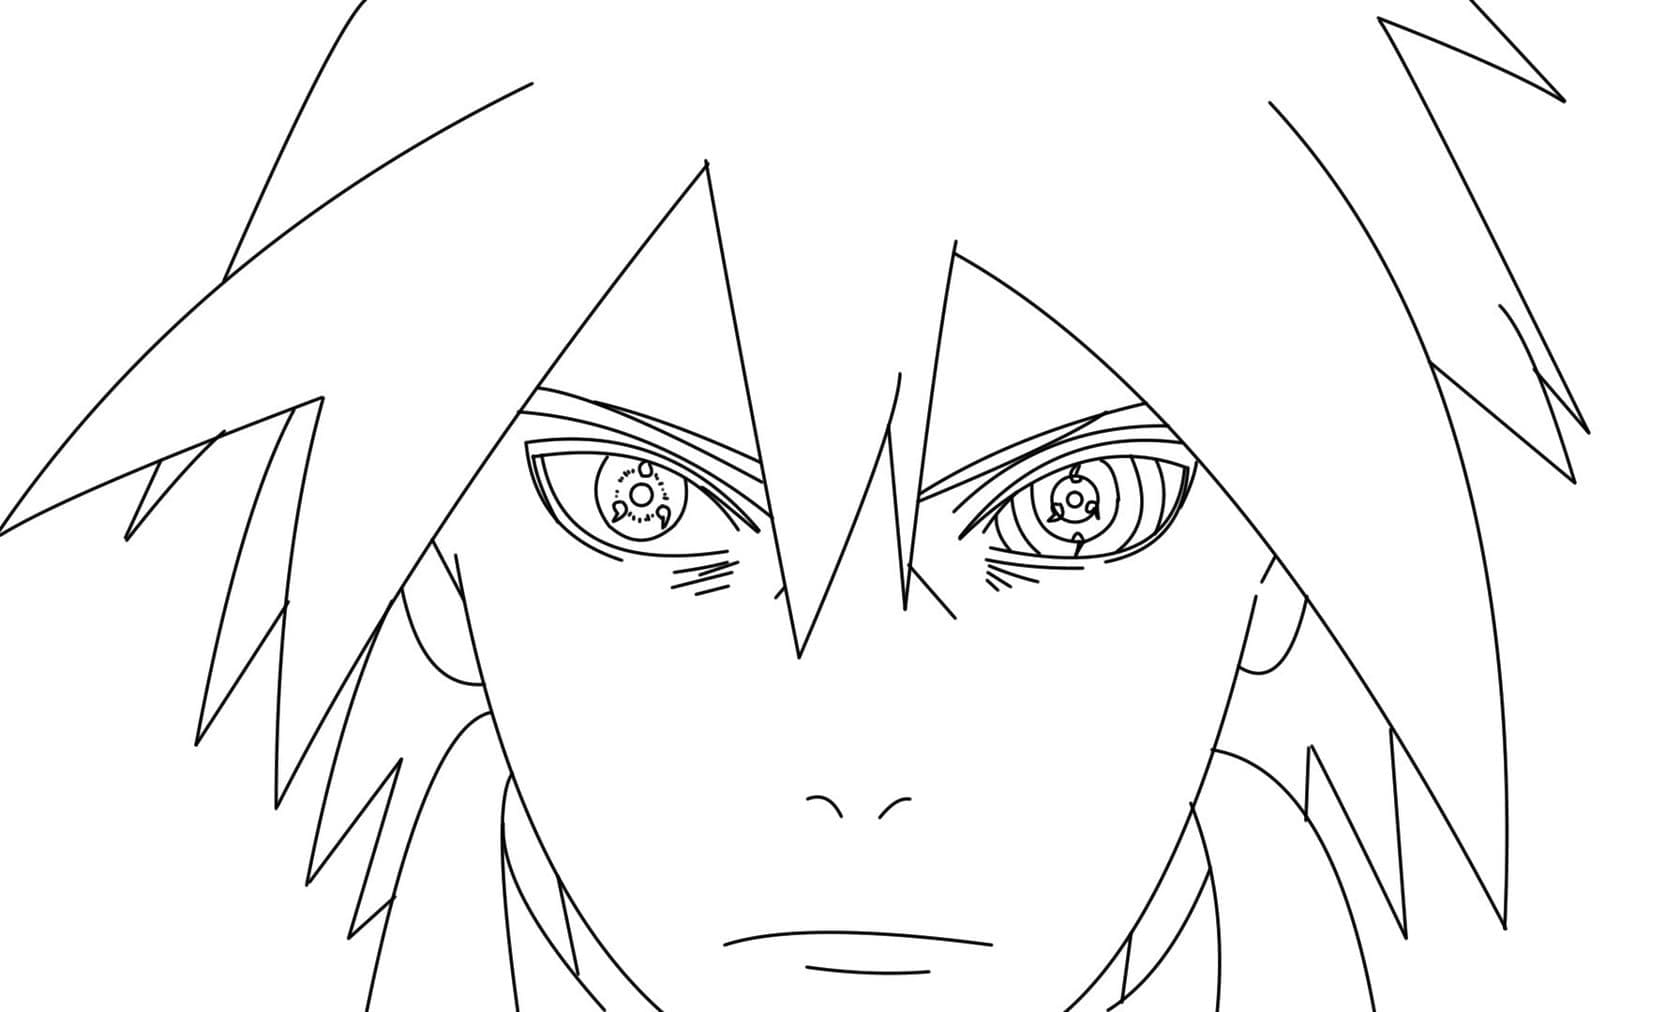 Amazing Sasuke coloring page - Download, Print or Color Online for Free